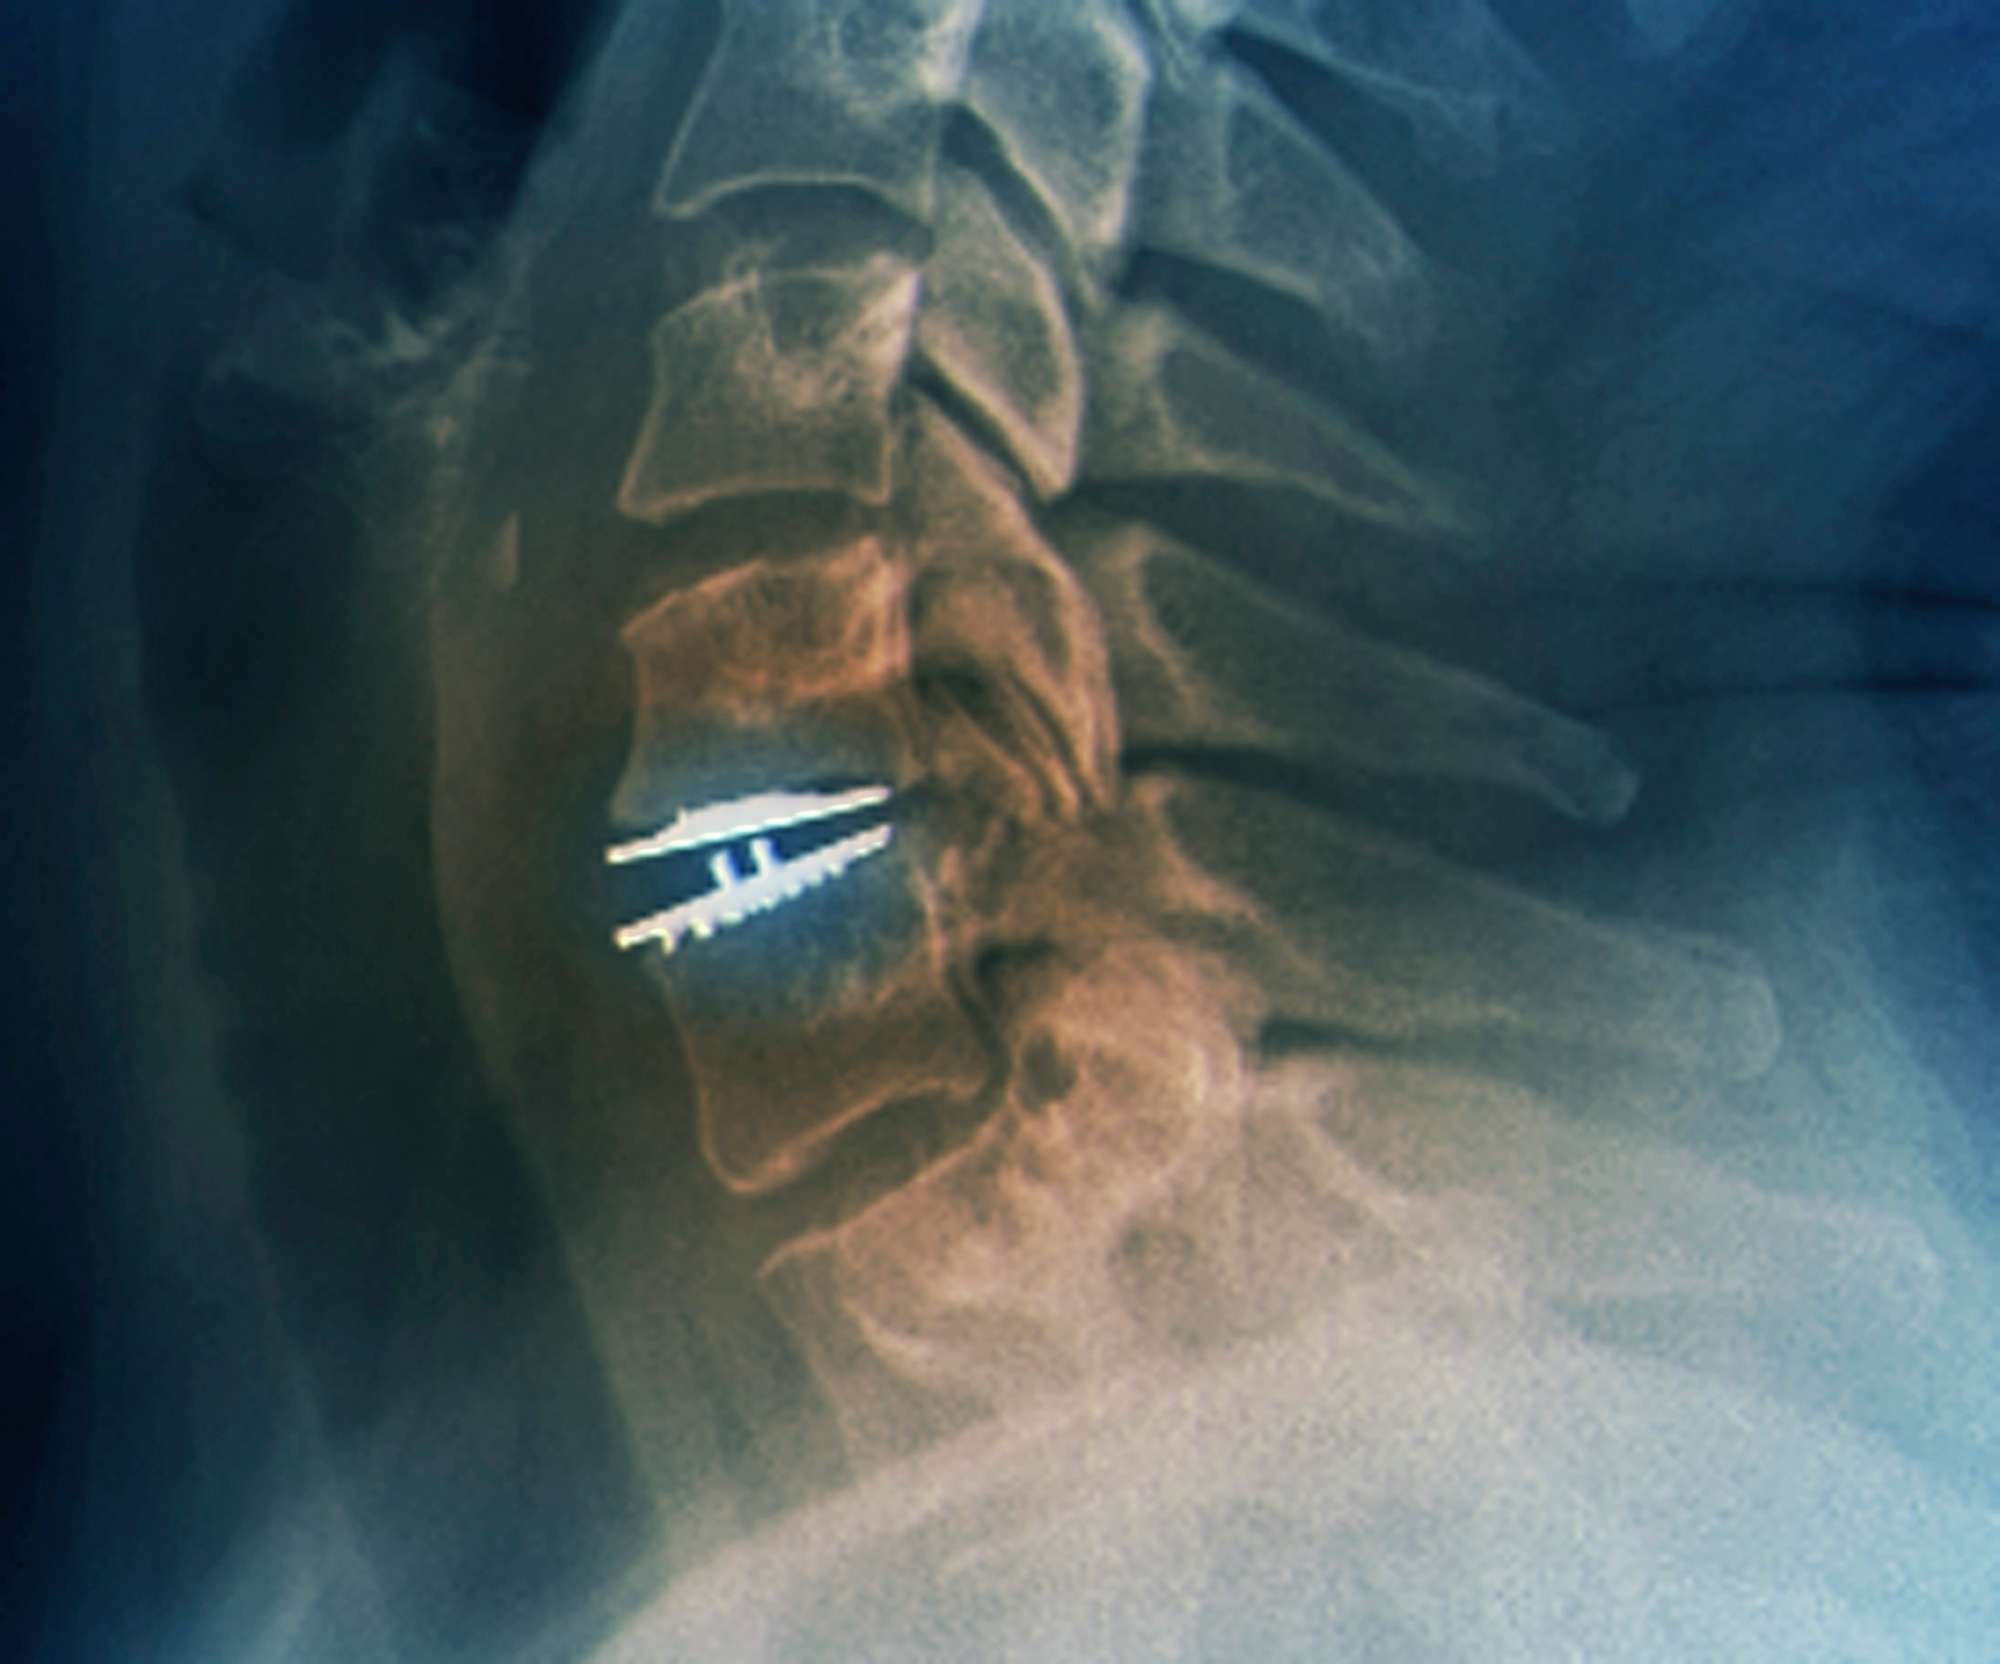 Cervical intervertebral disc implant. Coloured lateral X-ray of the cervical (neck) spine of a 38-year-old woman, showing the presence of an implant (white) following an operation to repair a slipped (herniated) intervertebral disc. This was a herniation of the disc between the C5 and C6 vertebrae, which was treated with the implantation of a Mobi-C artificial disc. Slipped discs can lead to the herniated tissue pressing on the spinal cord, causing severe pain and other neurological symptoms. (KEYSTONE/SCIENCE PHOTO LIBRARY/ZEPHYR/SCIENCE PHOTO LIBRARY) CERVICAL INTERVERTEBRAL DISC IMPLANT, X-RAY